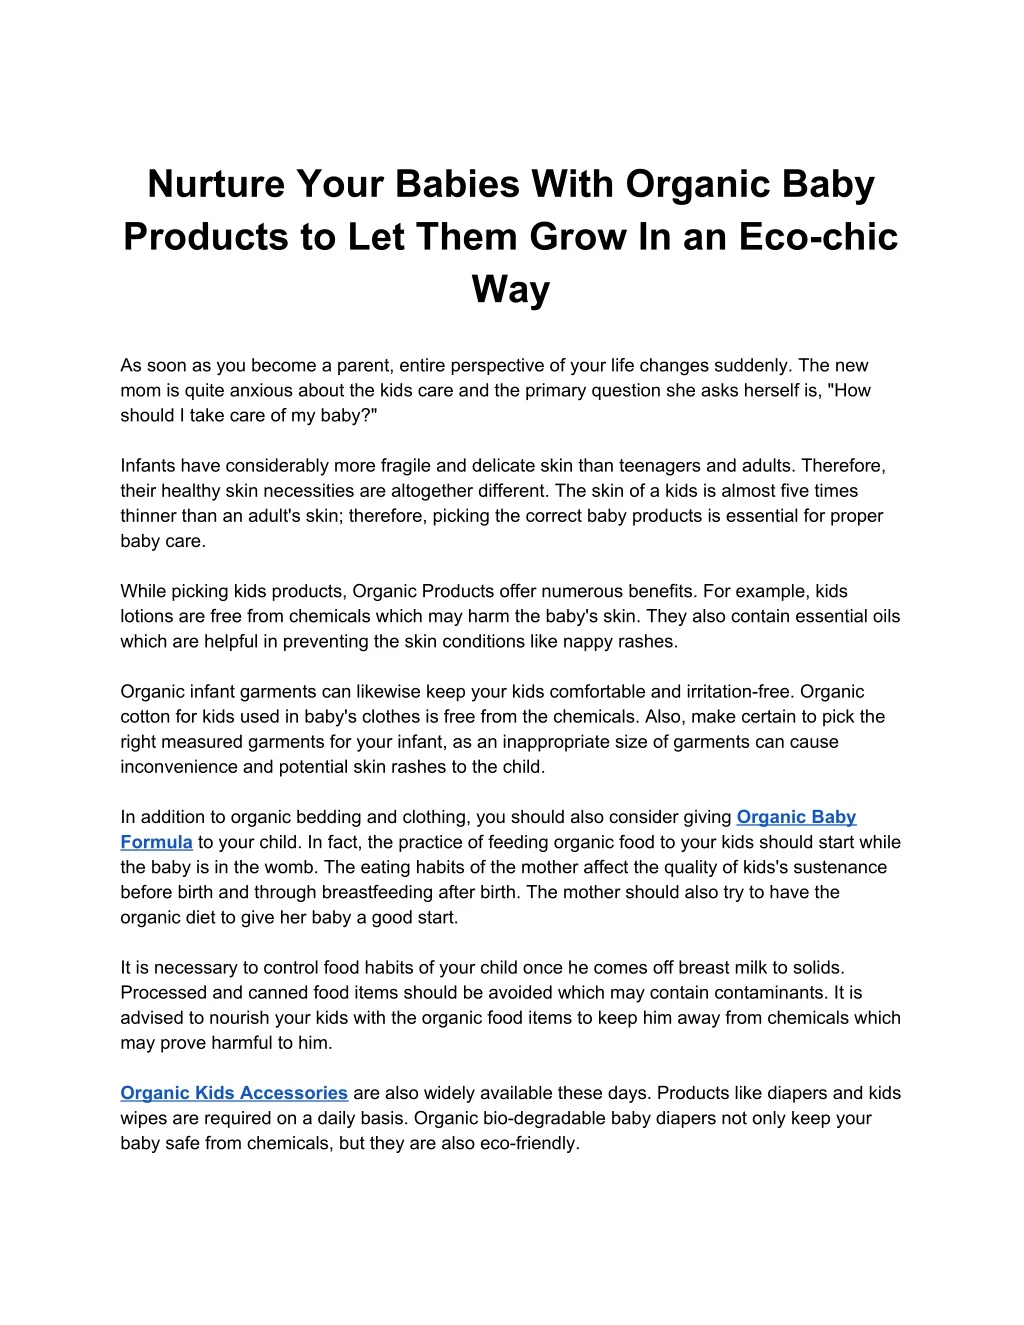 nurture your babies with organic baby products